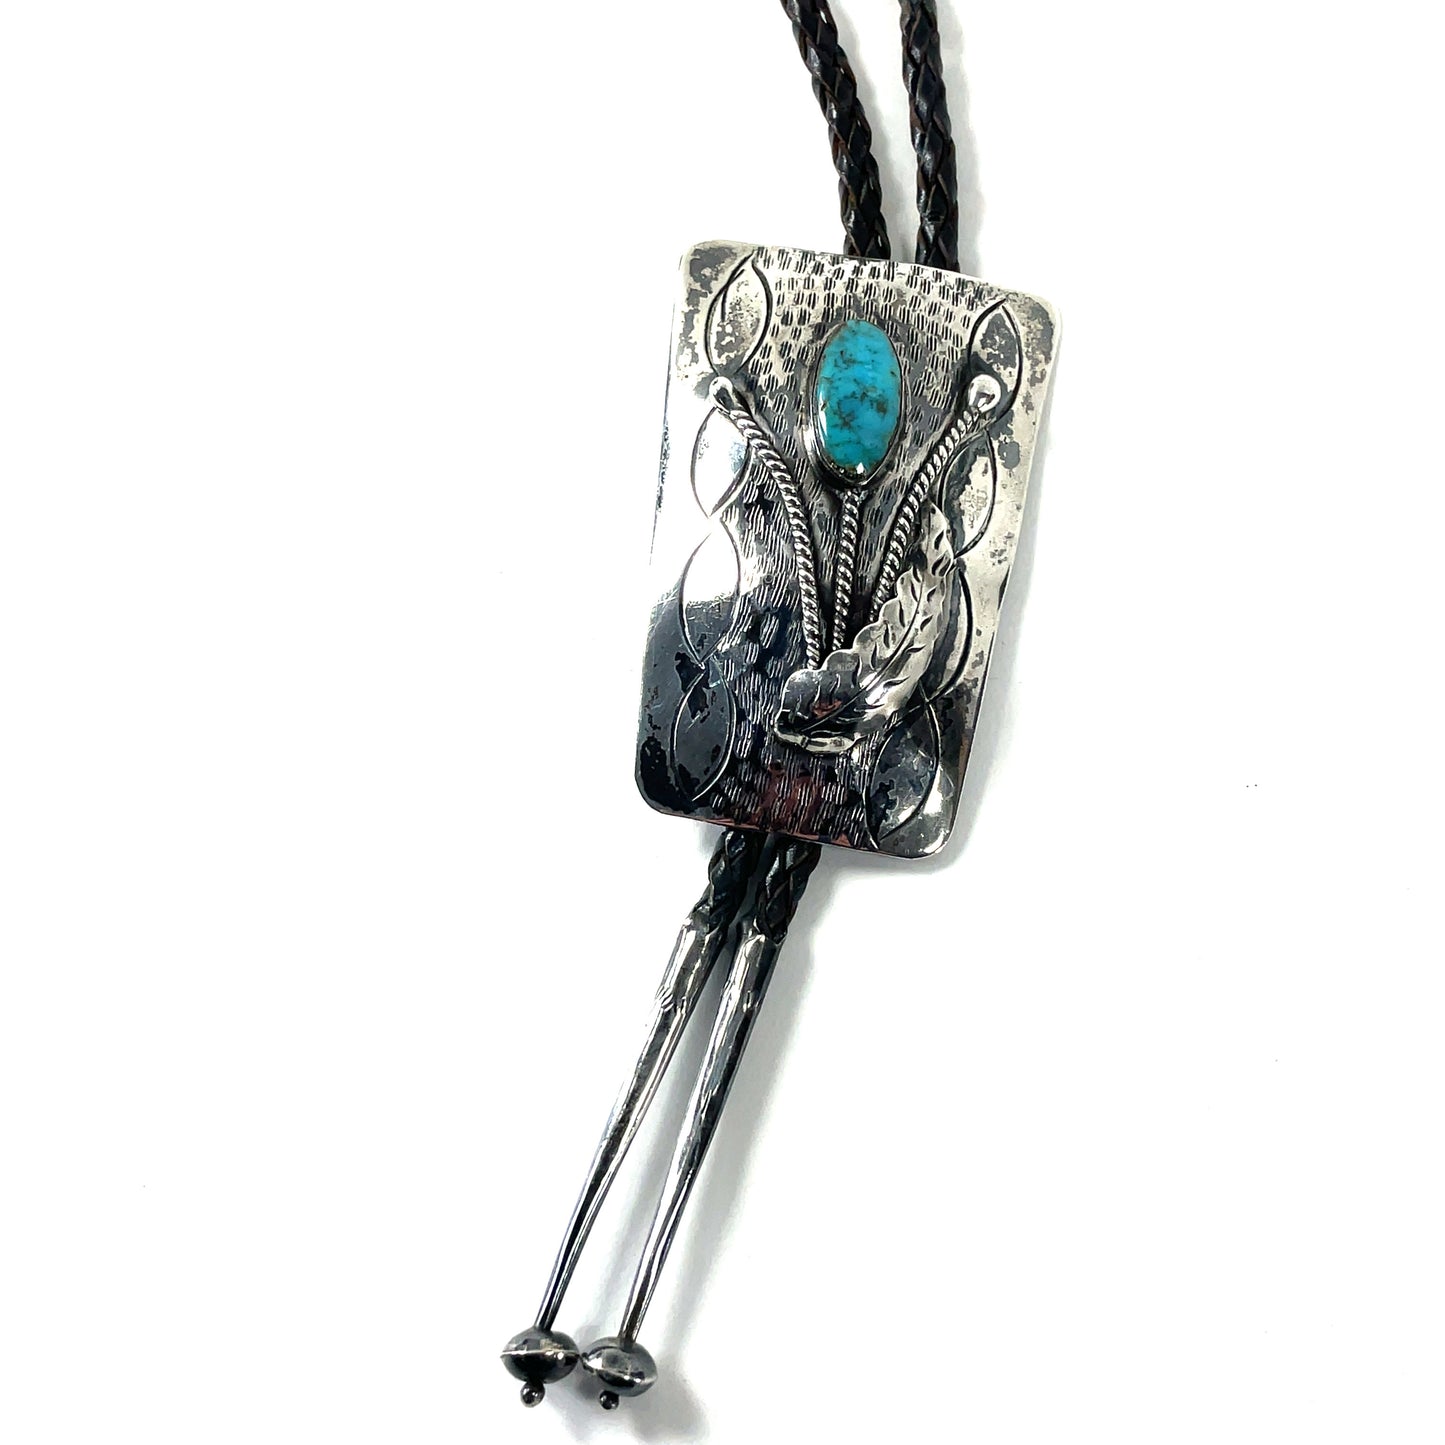 Vintage Kingman Turquoise and Sterling Silver Bolo Tie Southwestern